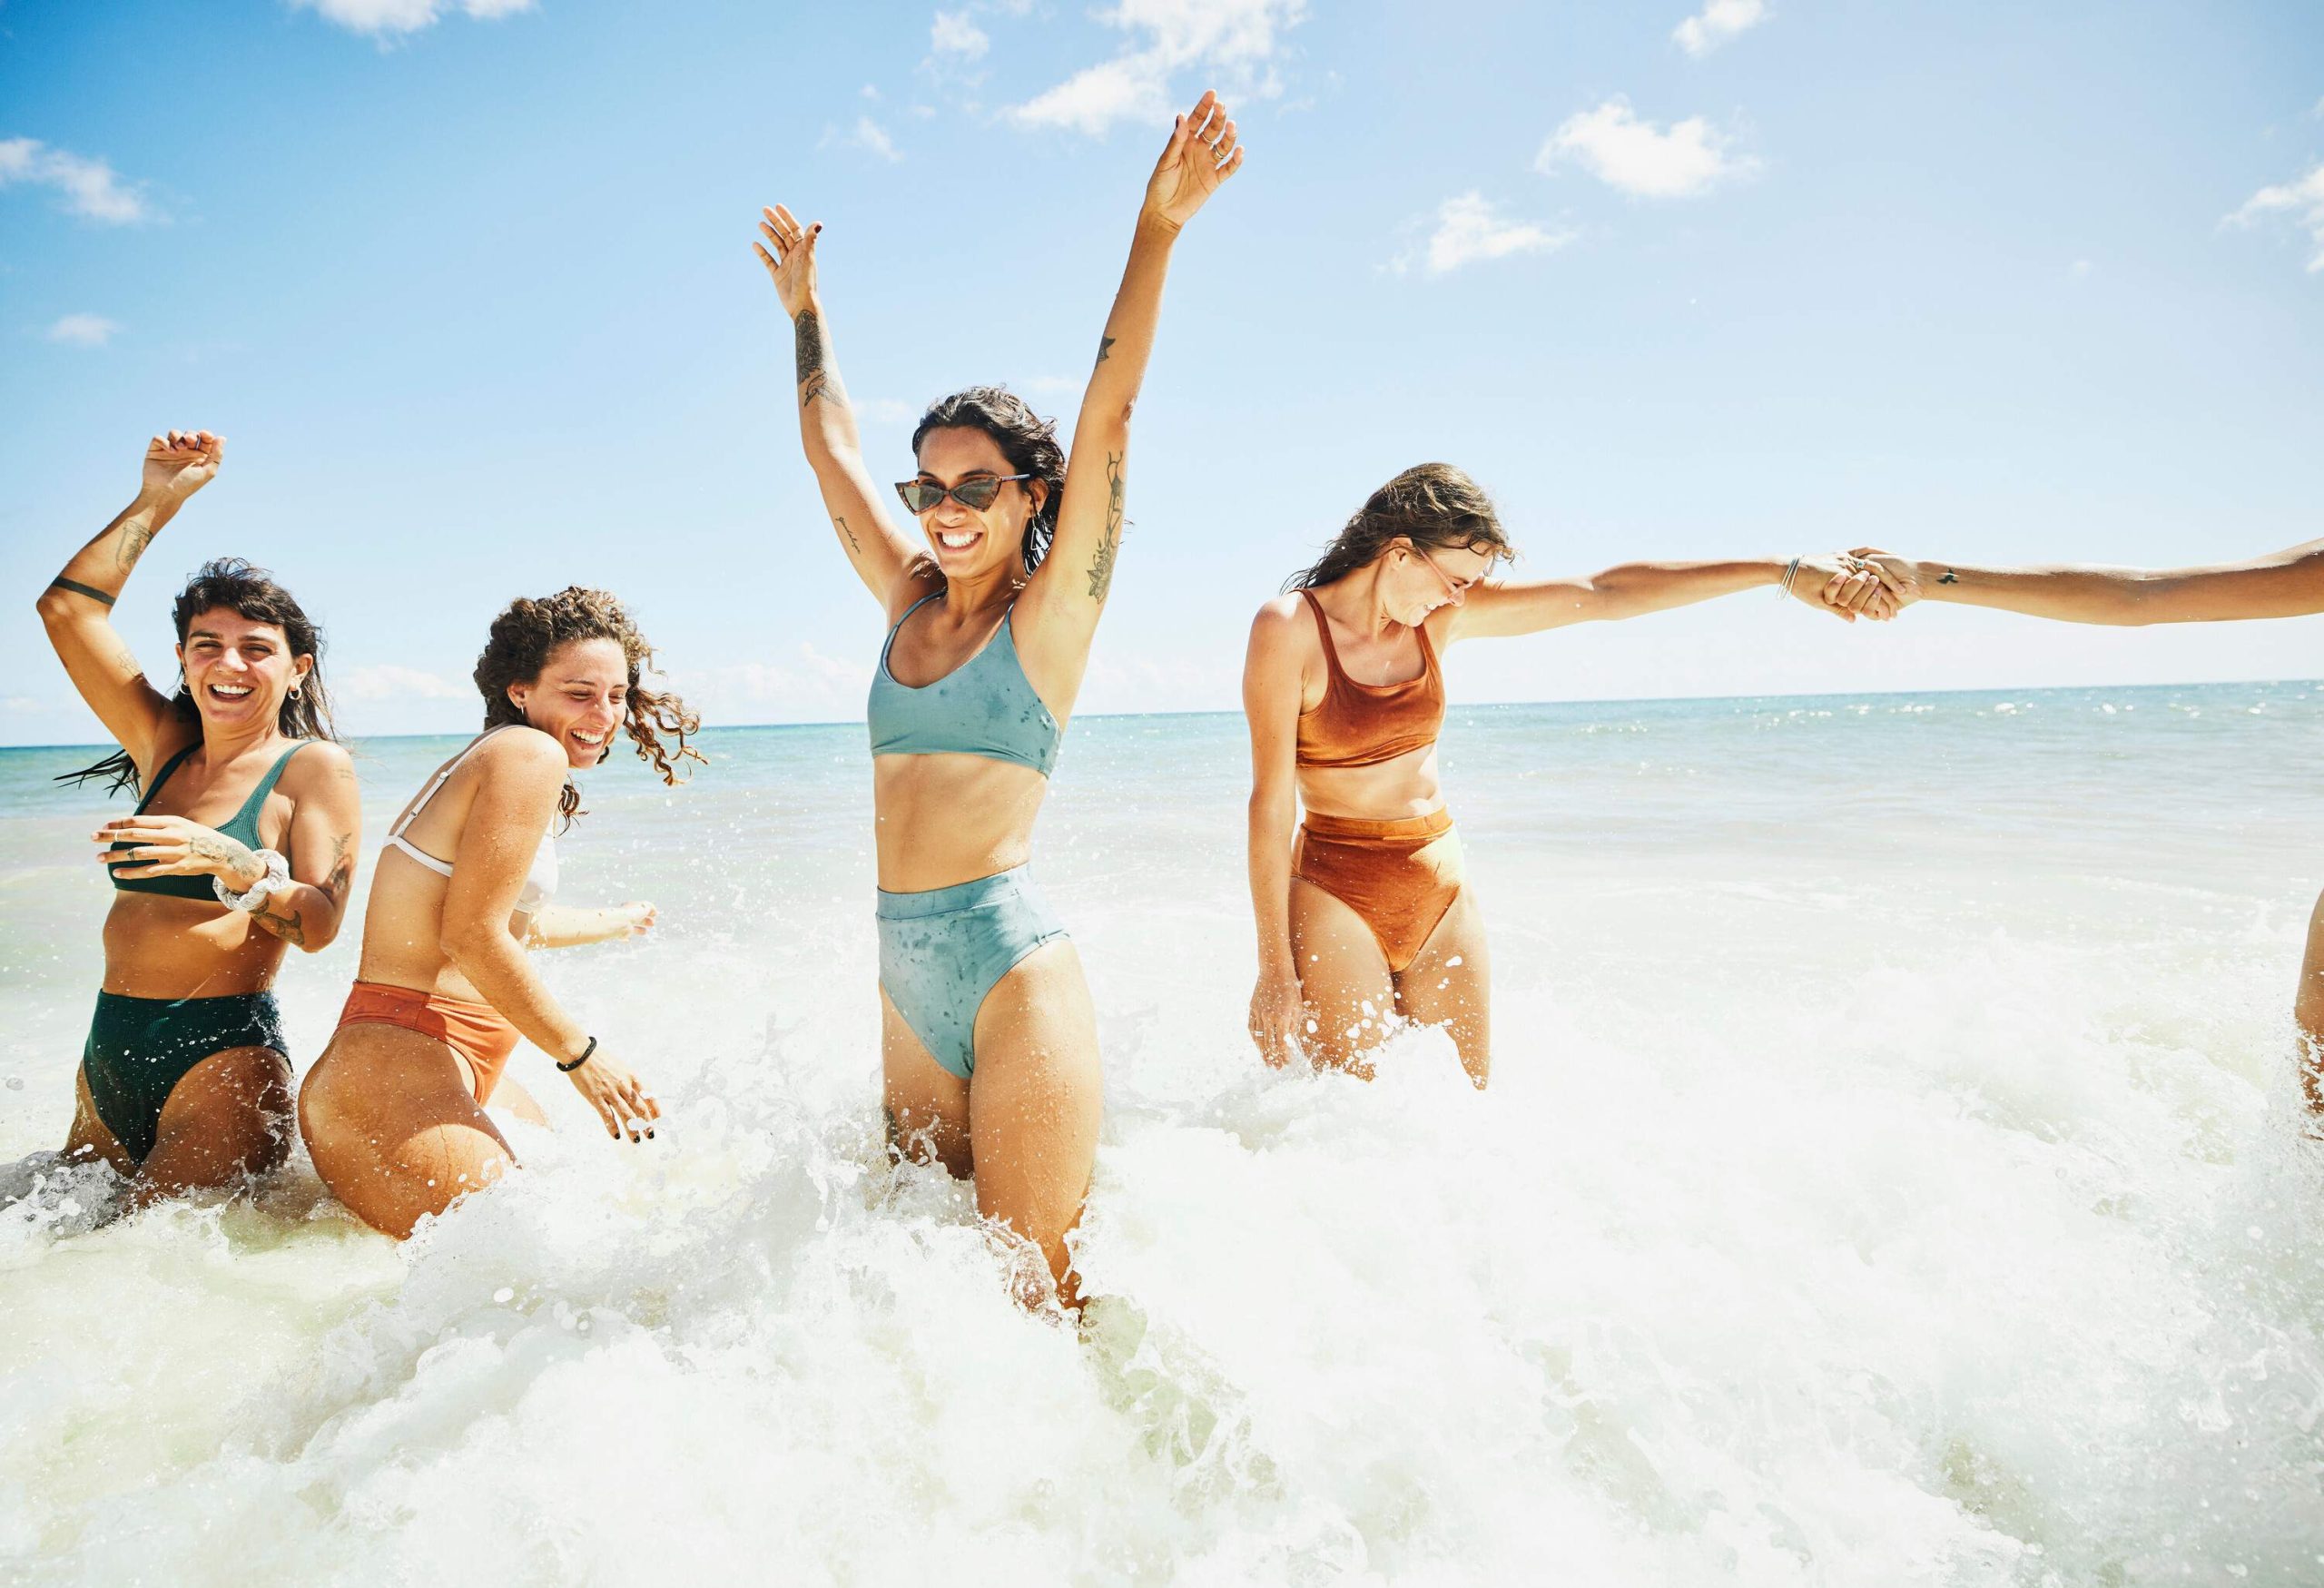 A group of friends, donning two-piece swimsuits, joyfully splash and playfully get smashed by crashing waves.